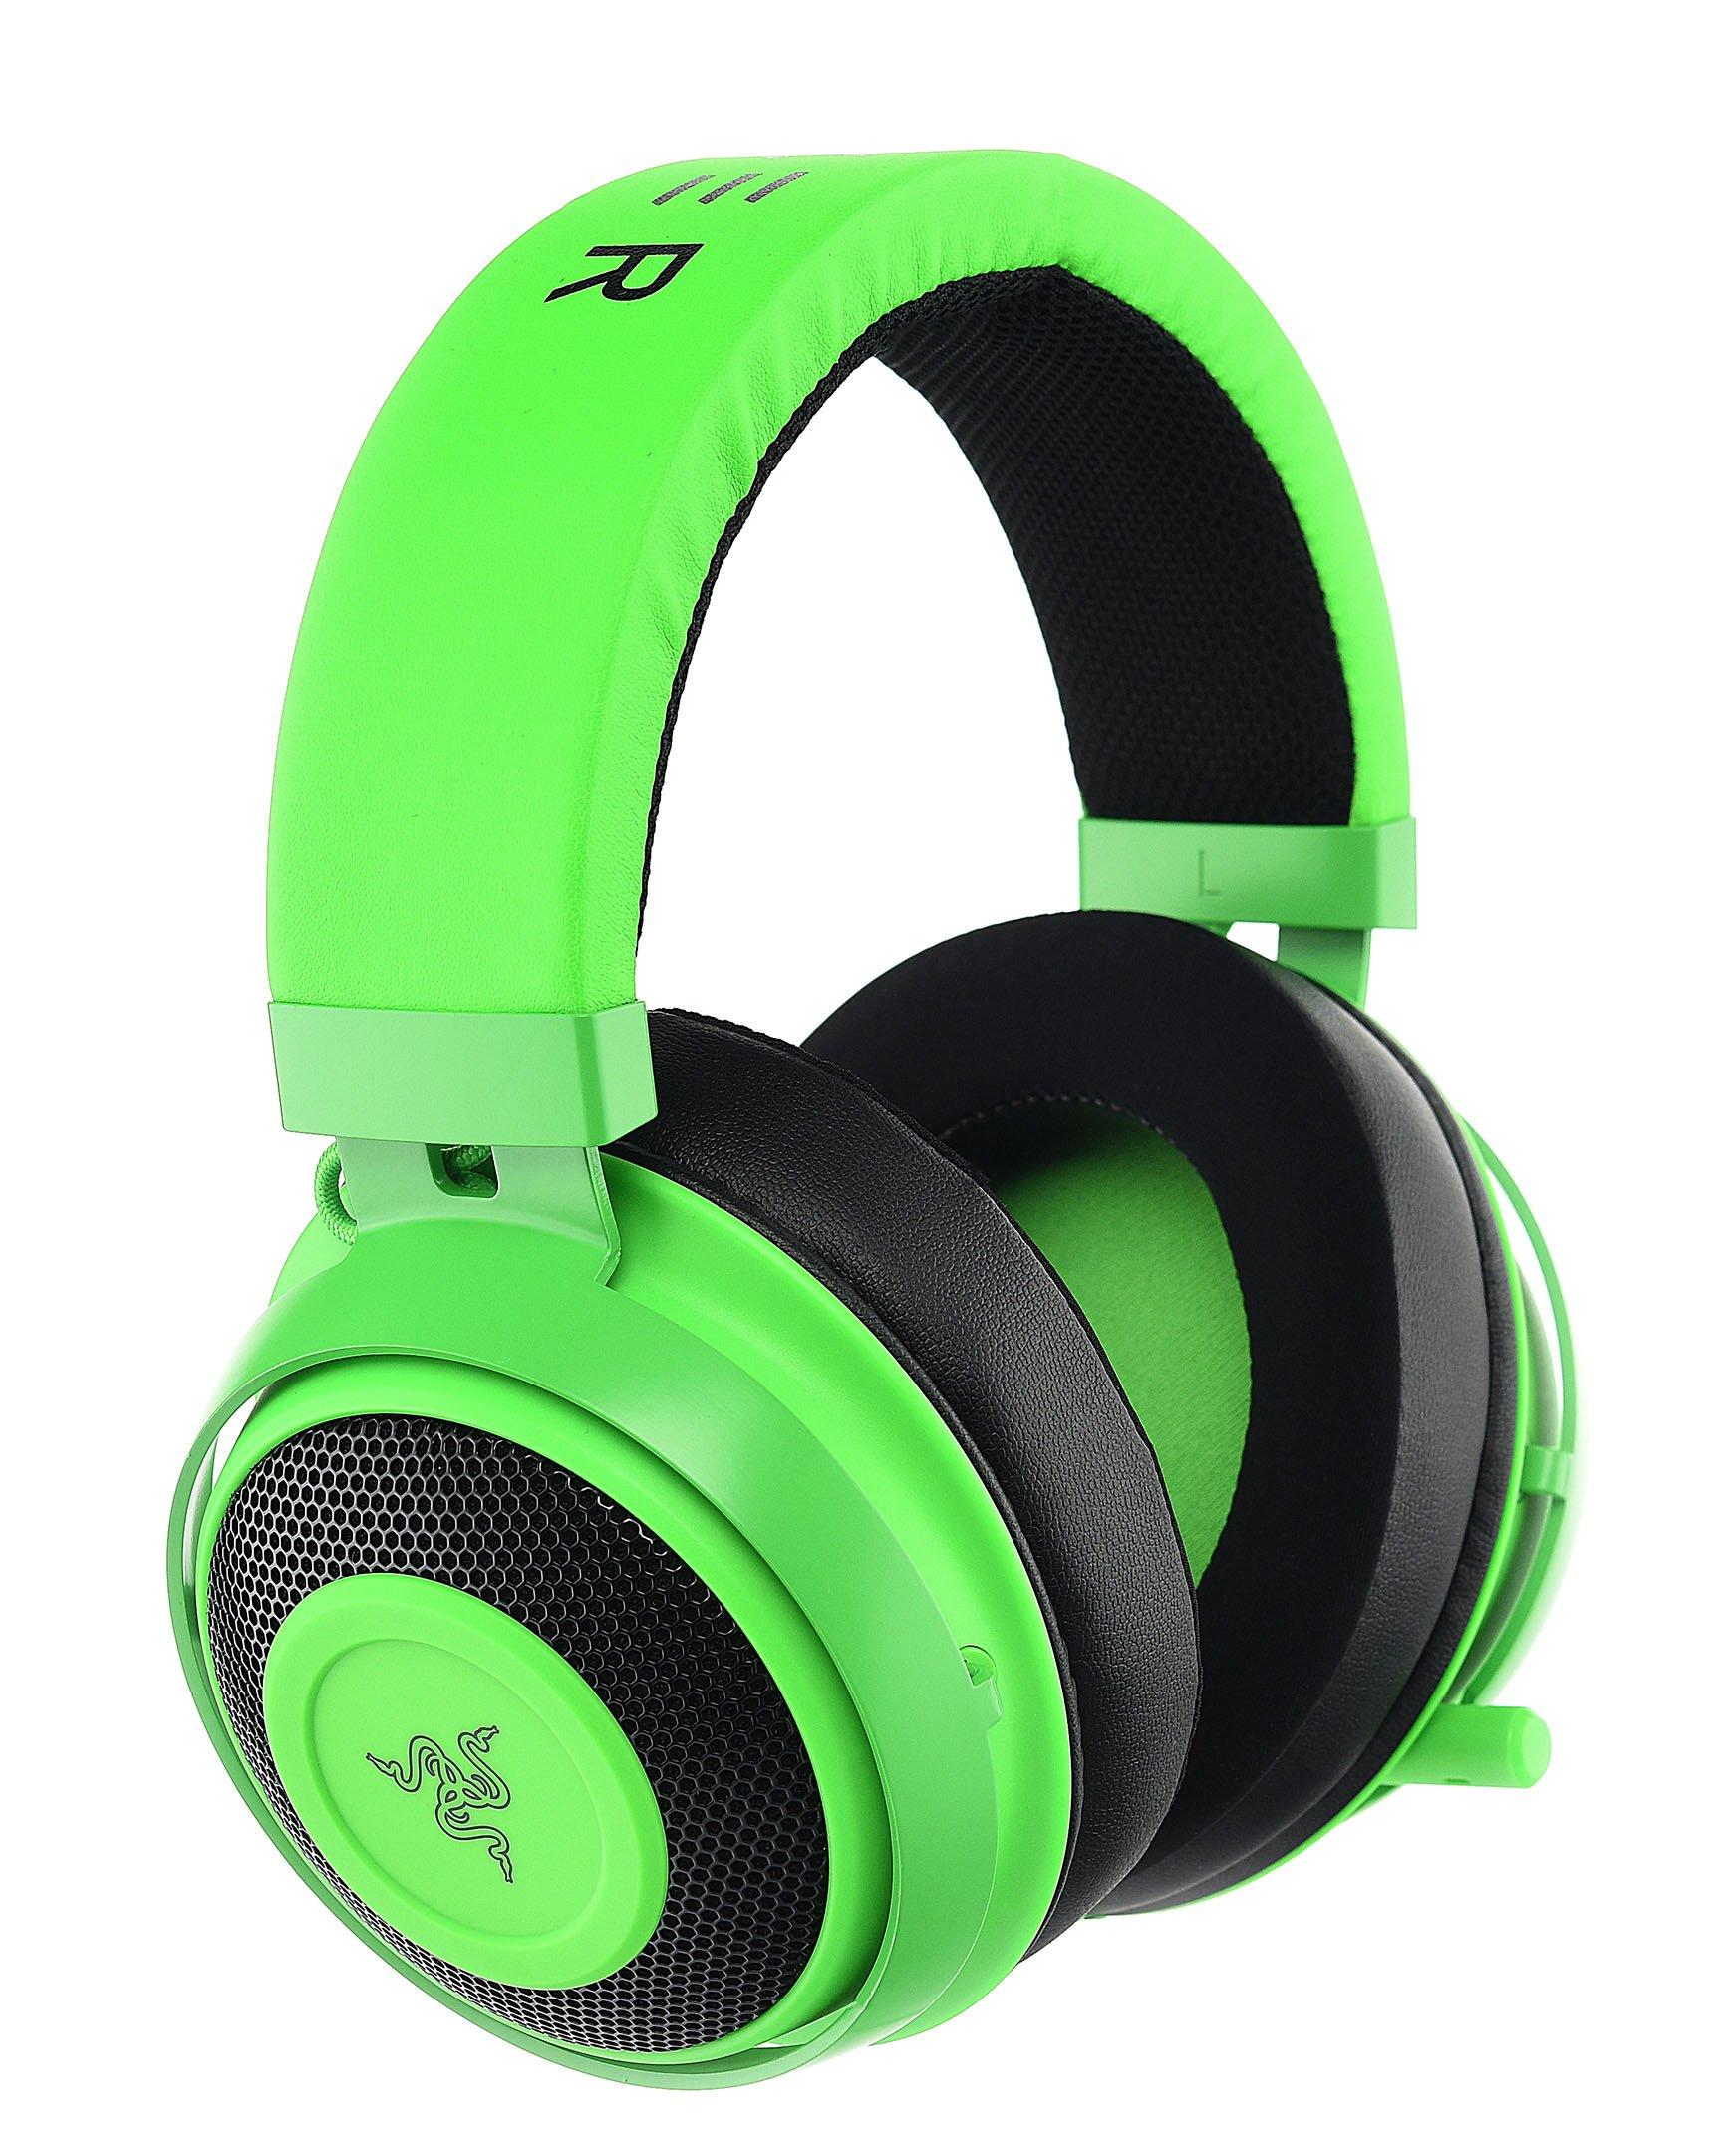 Razer Kraken Green Equipped With 7 1 Surround Sound Software Clear Accurate Positional Audio Price In Saudi Arabia Extra Stores Saudi Arabia Kanbkam